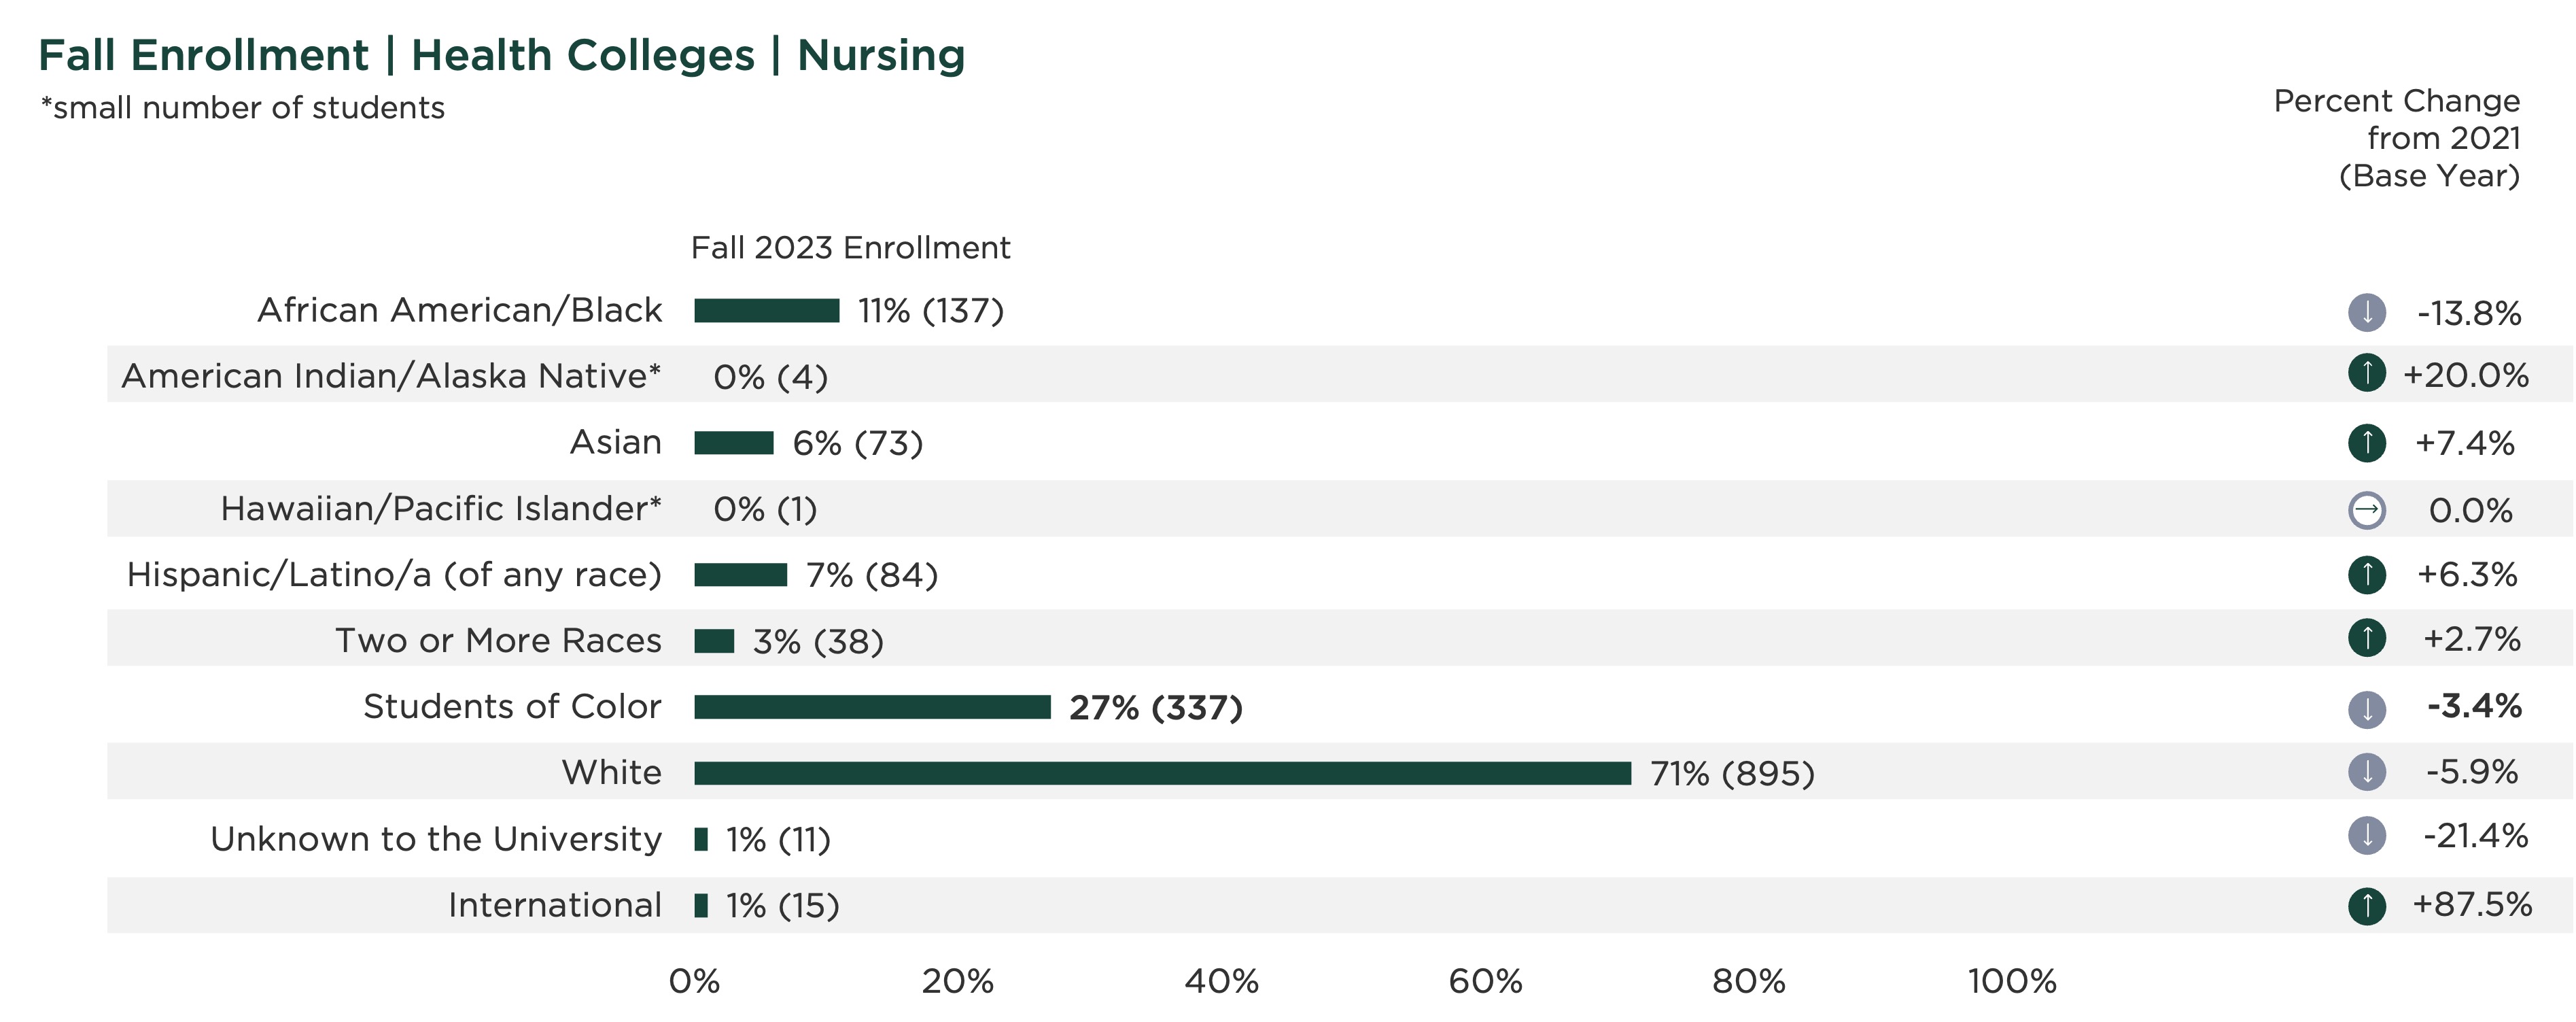 graph showing fall enrollment by race and ethnicity for the College of Nursing